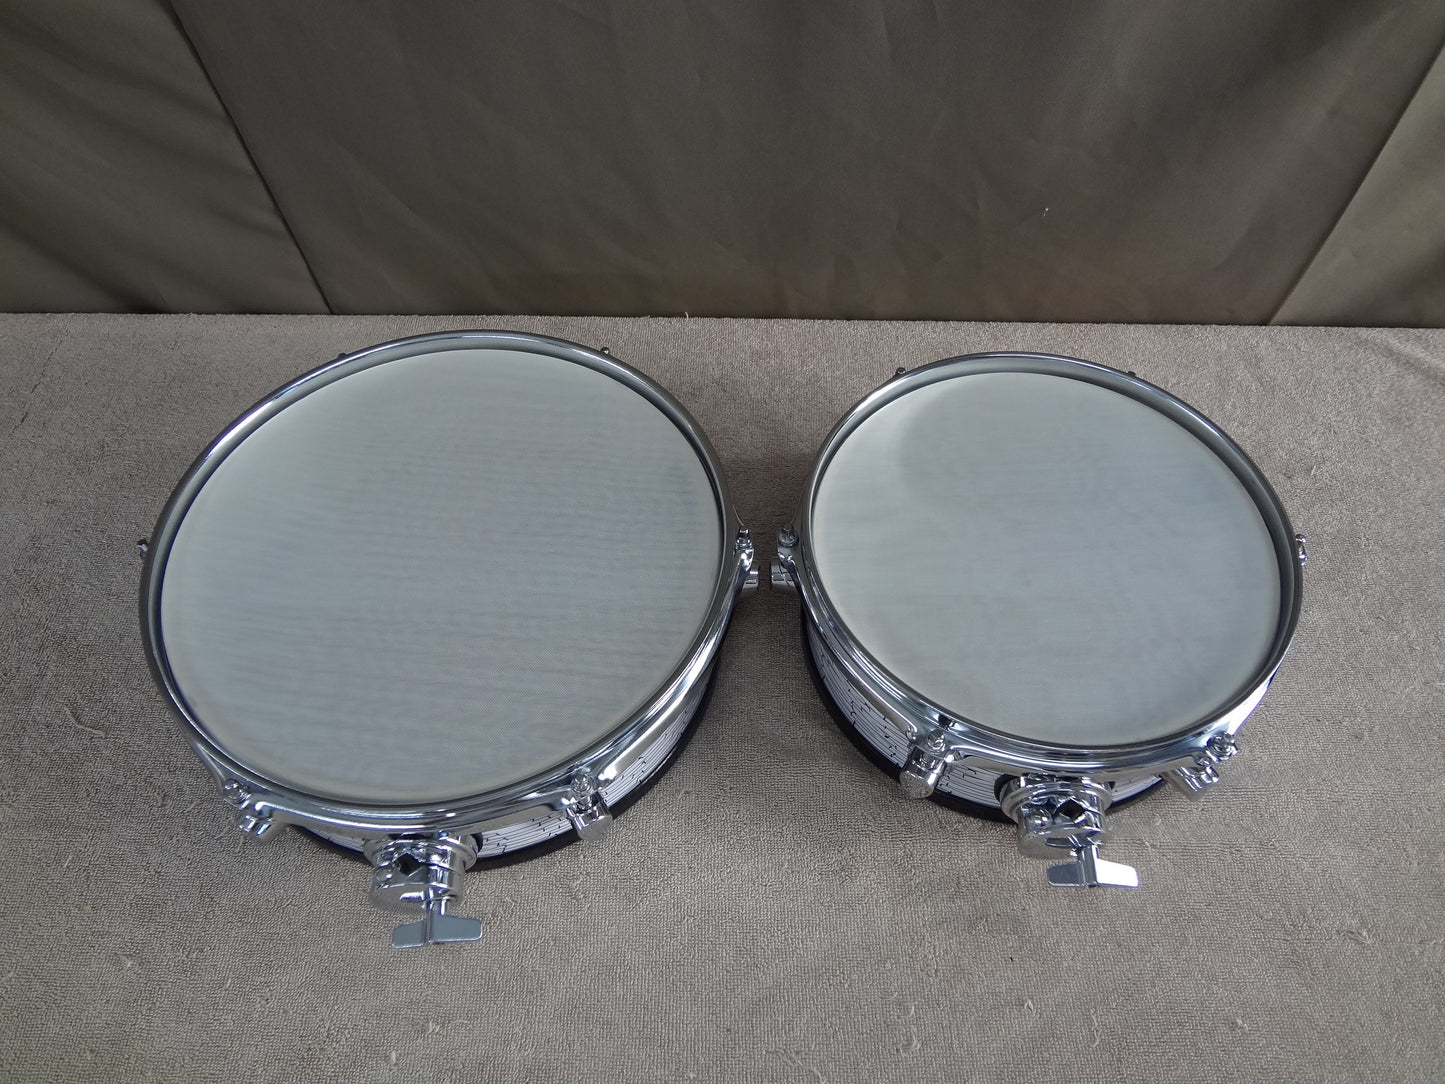 NEW 4 PIECE CUSTOM ELECTRONIC DRUM SHELL PACK - WHITE/BLACK ETCH